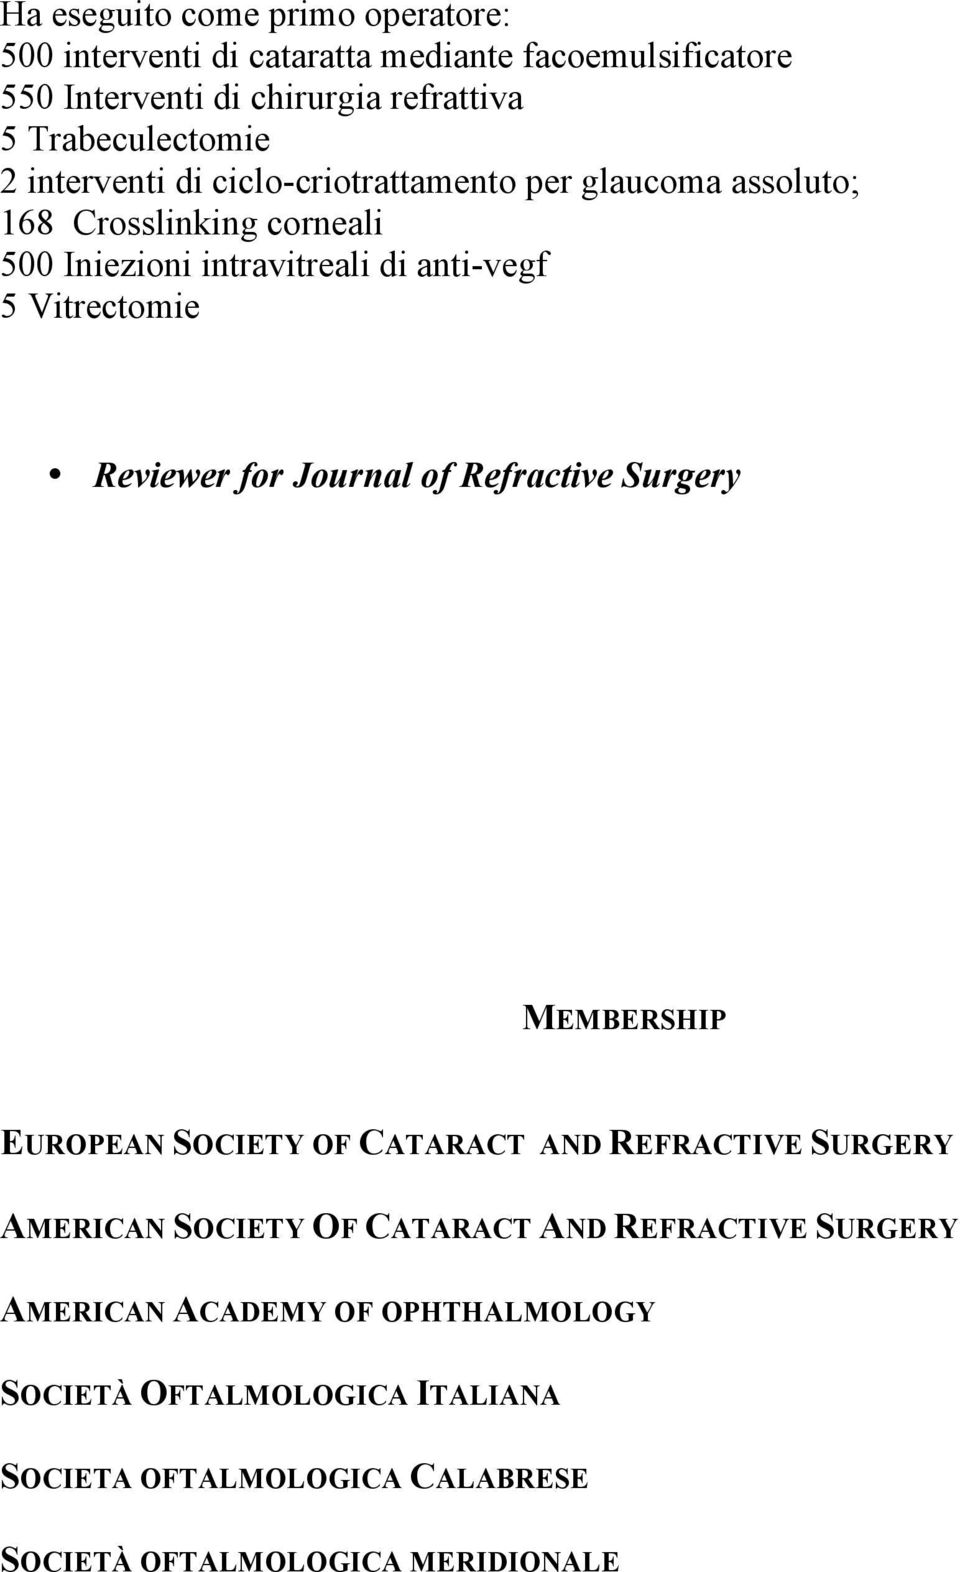 5 Vitrectomie Reviewer for Journal of Refractive Surgery MEMBERSHIP EUROPEAN SOCIETY OF CATARACT AND REFRACTIVE SURGERY AMERICAN SOCIETY OF